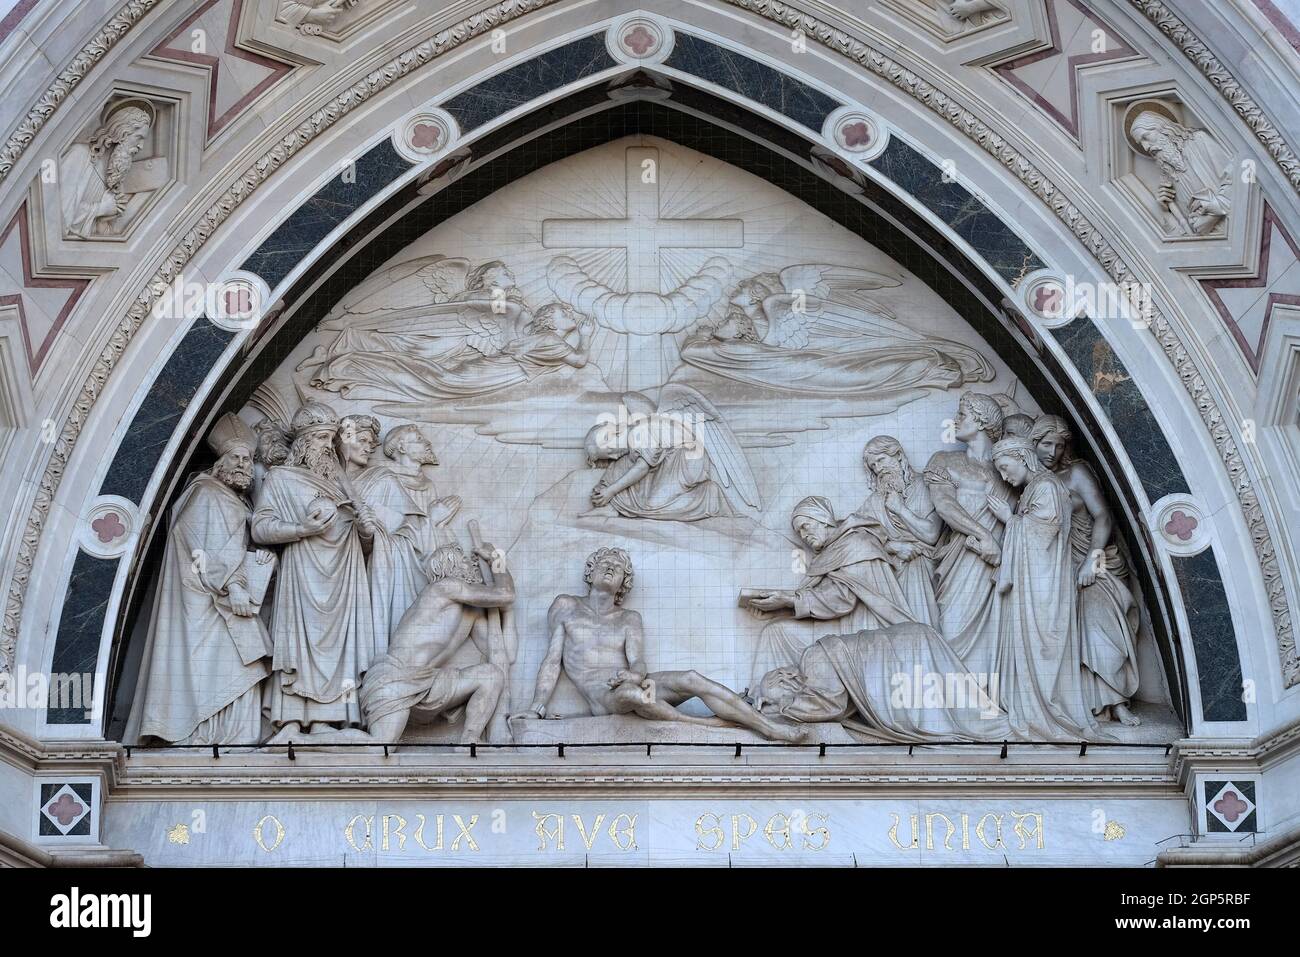 Sculpted lunette containing a relief of the Triumph of the Cross, by Giovanni Dupre, over the central door of the of Basilica of Santa Croce (Basilica Stock Photo